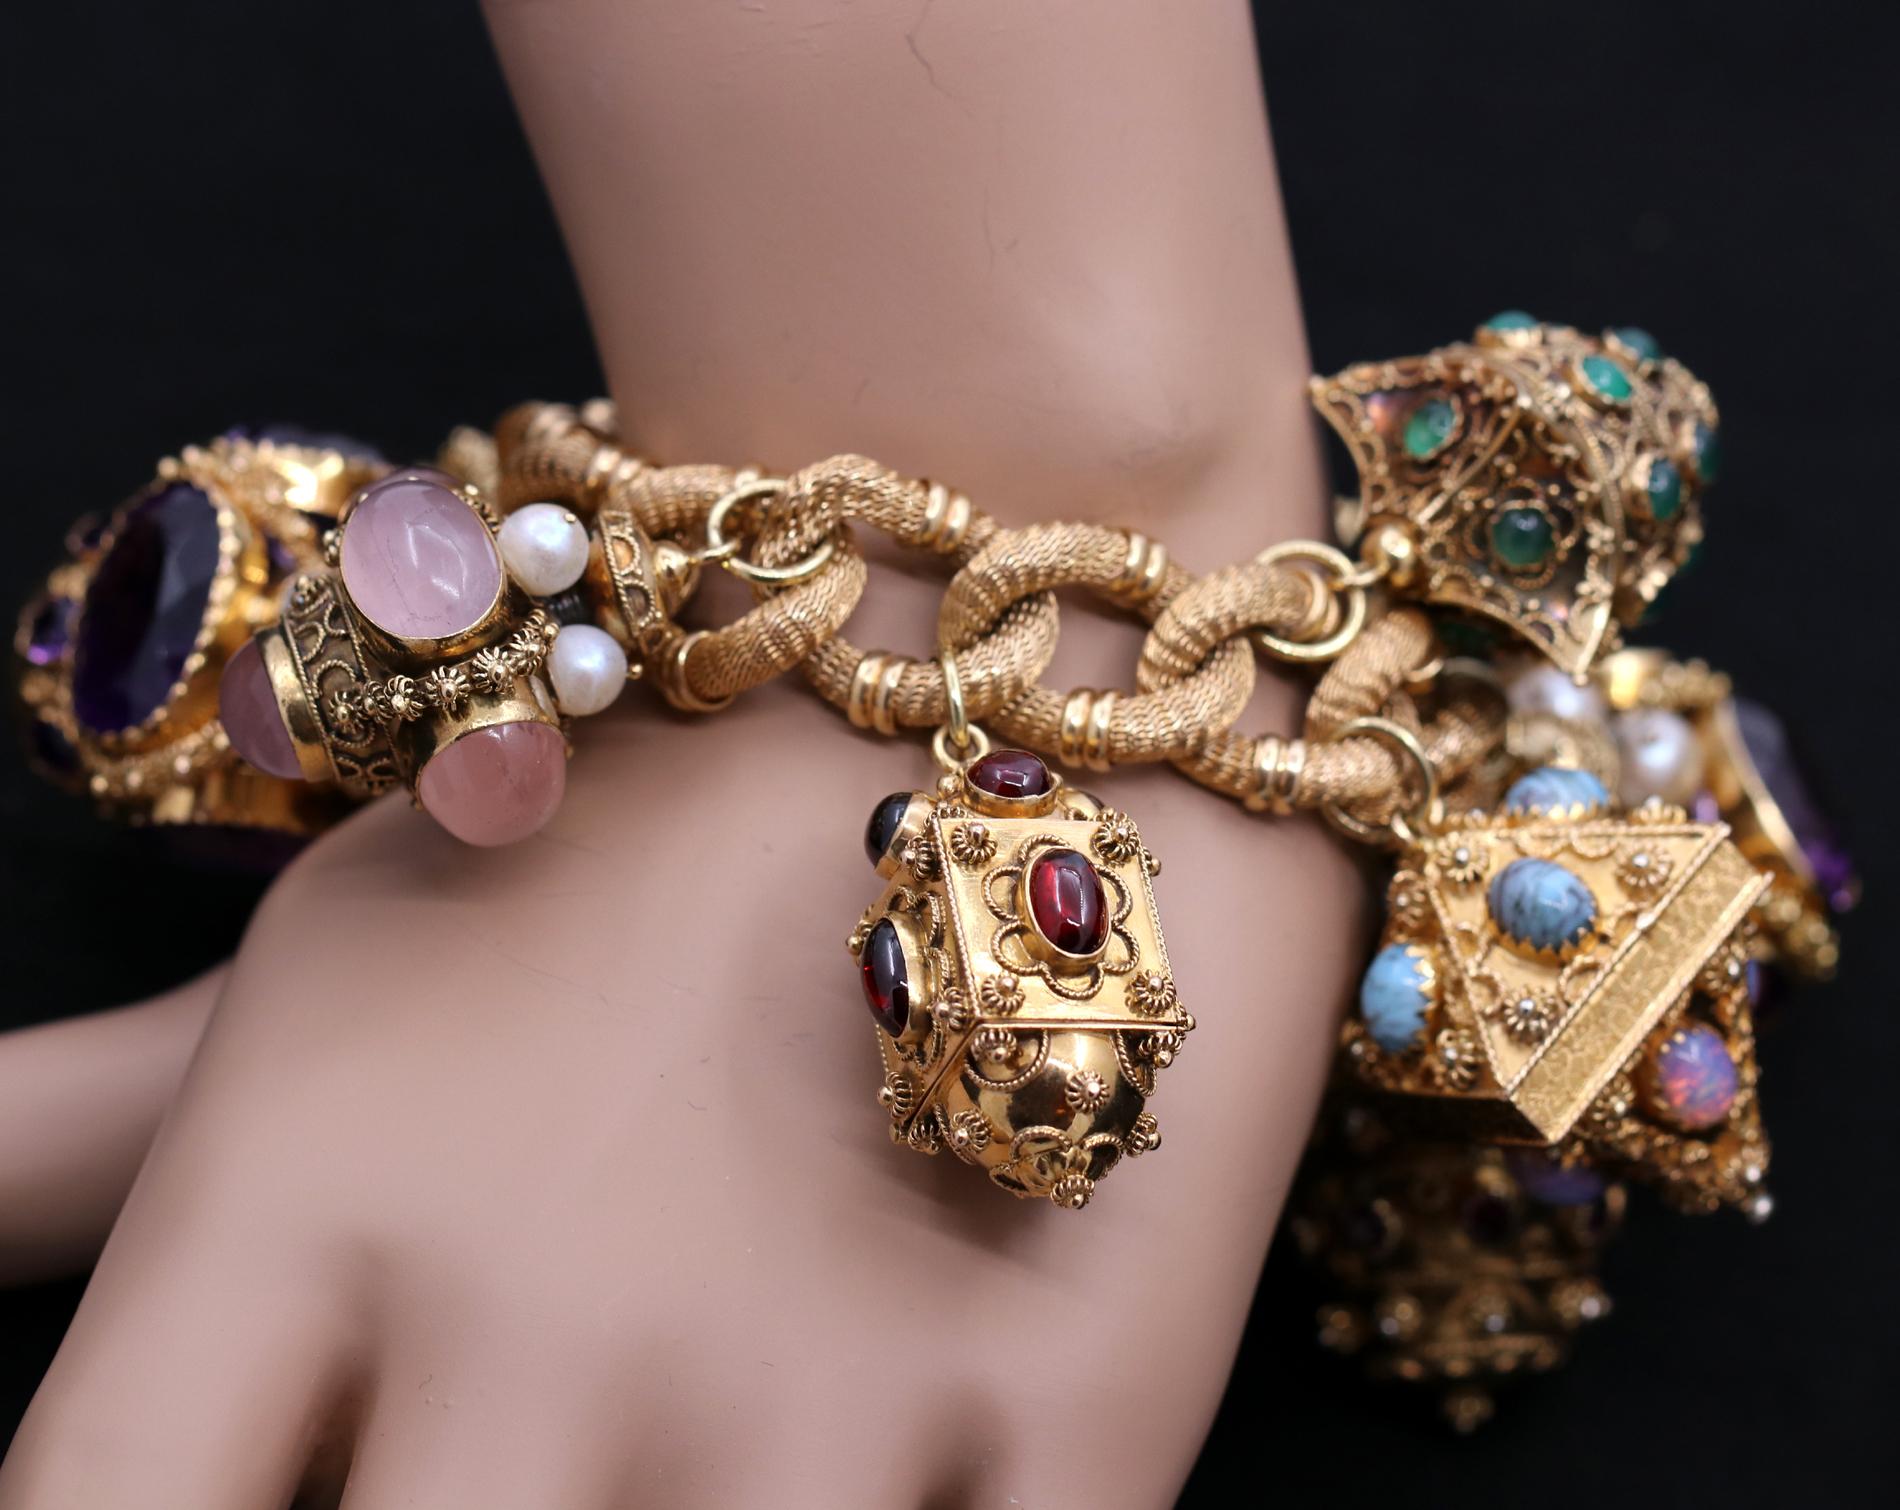 Midcentury Gold and Gemstone Fob Style Etruscan Revival Charm Bracelet ...